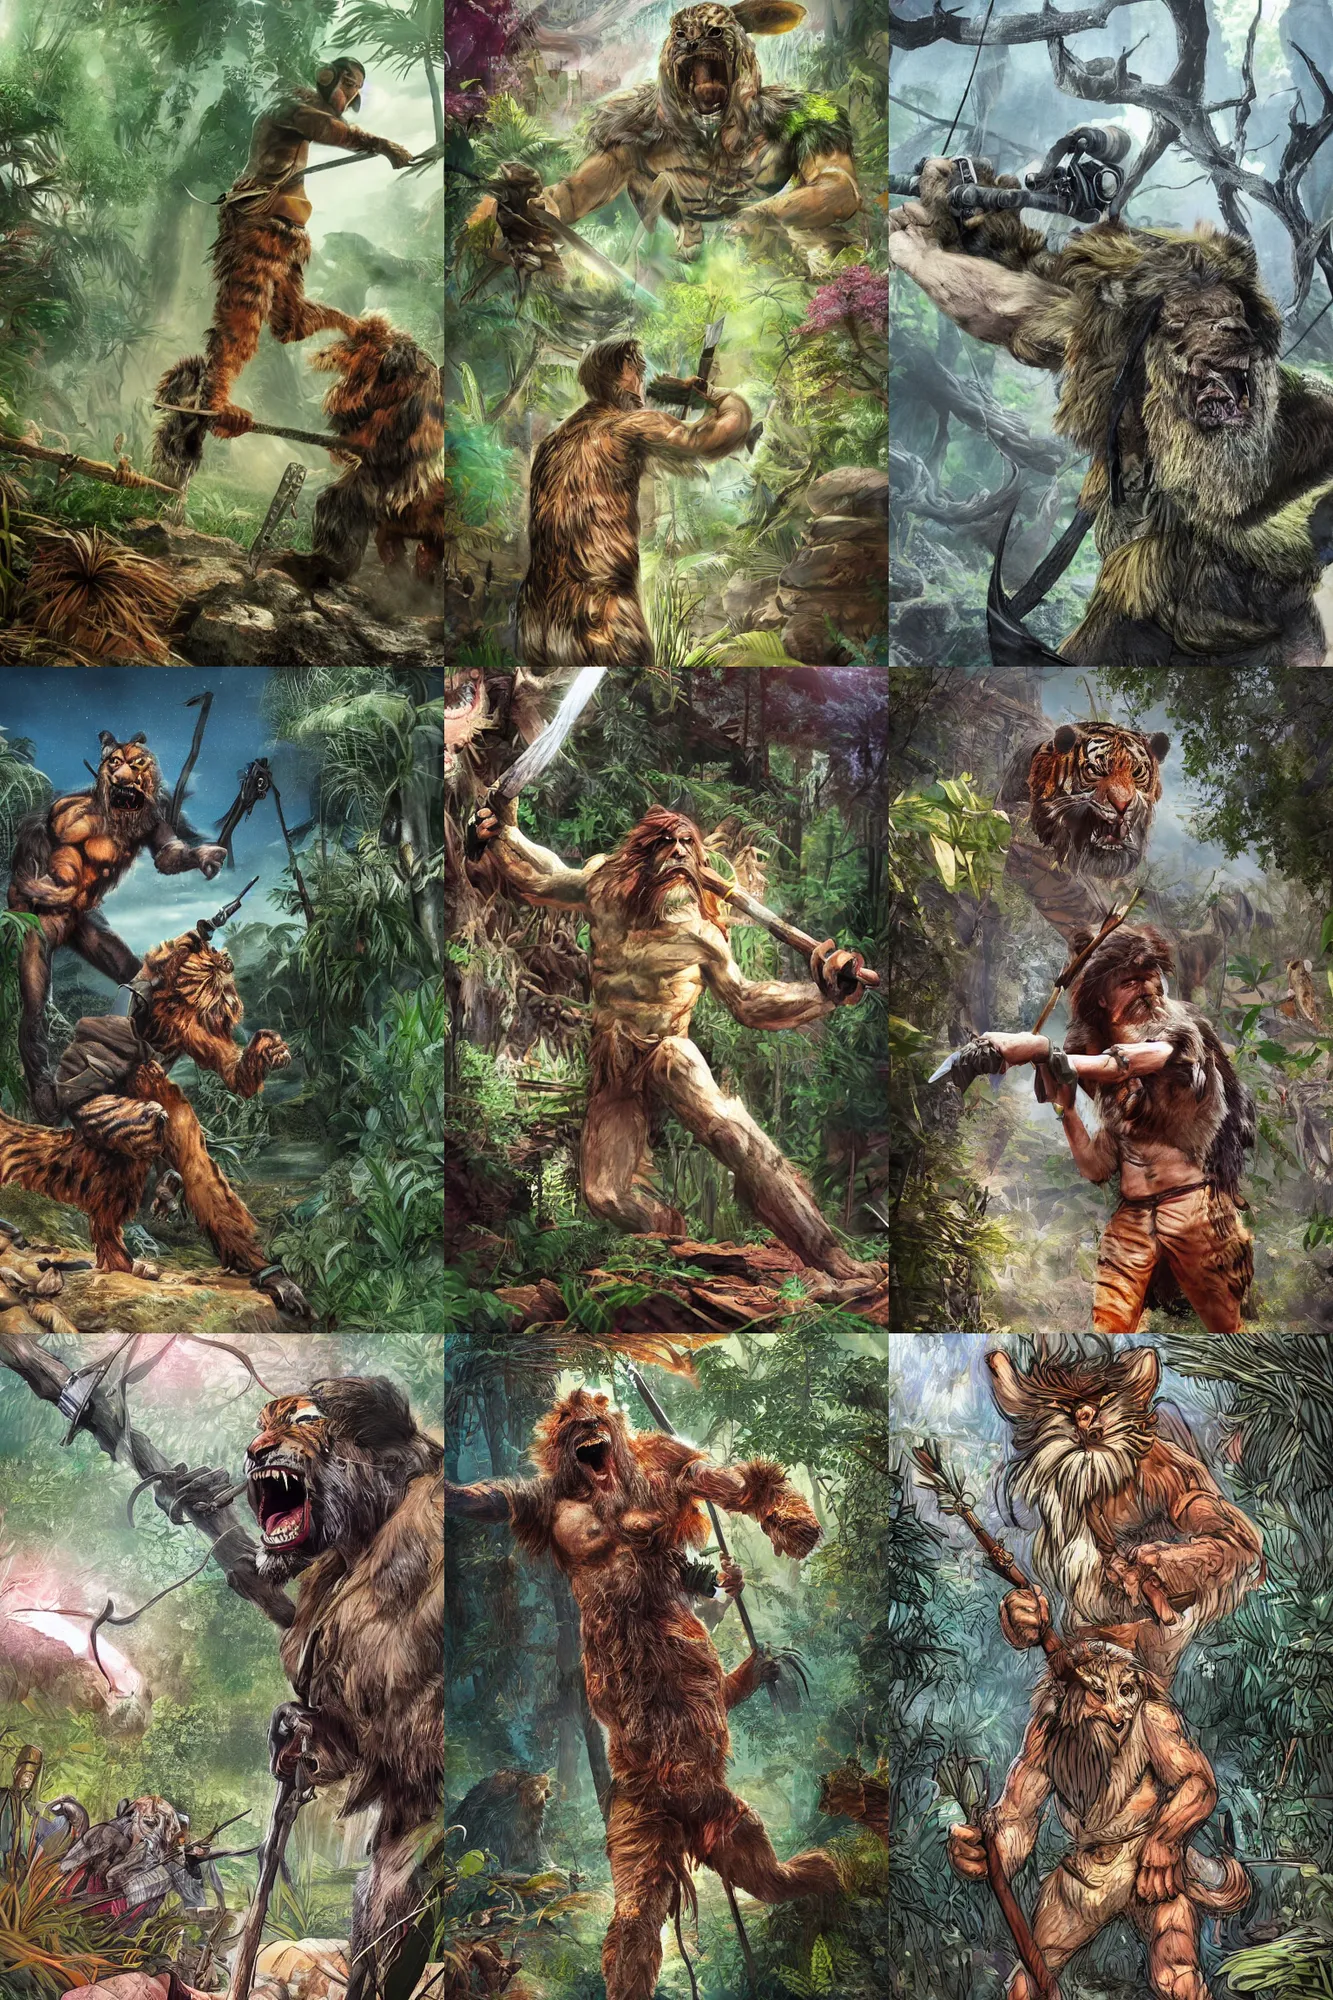 Prompt: dystopian caveman wearing vr headsets in a hunting pose holding a wooden spear, a saber - toothed tiger ambushing him, digital art, colorful, lots of vegetation